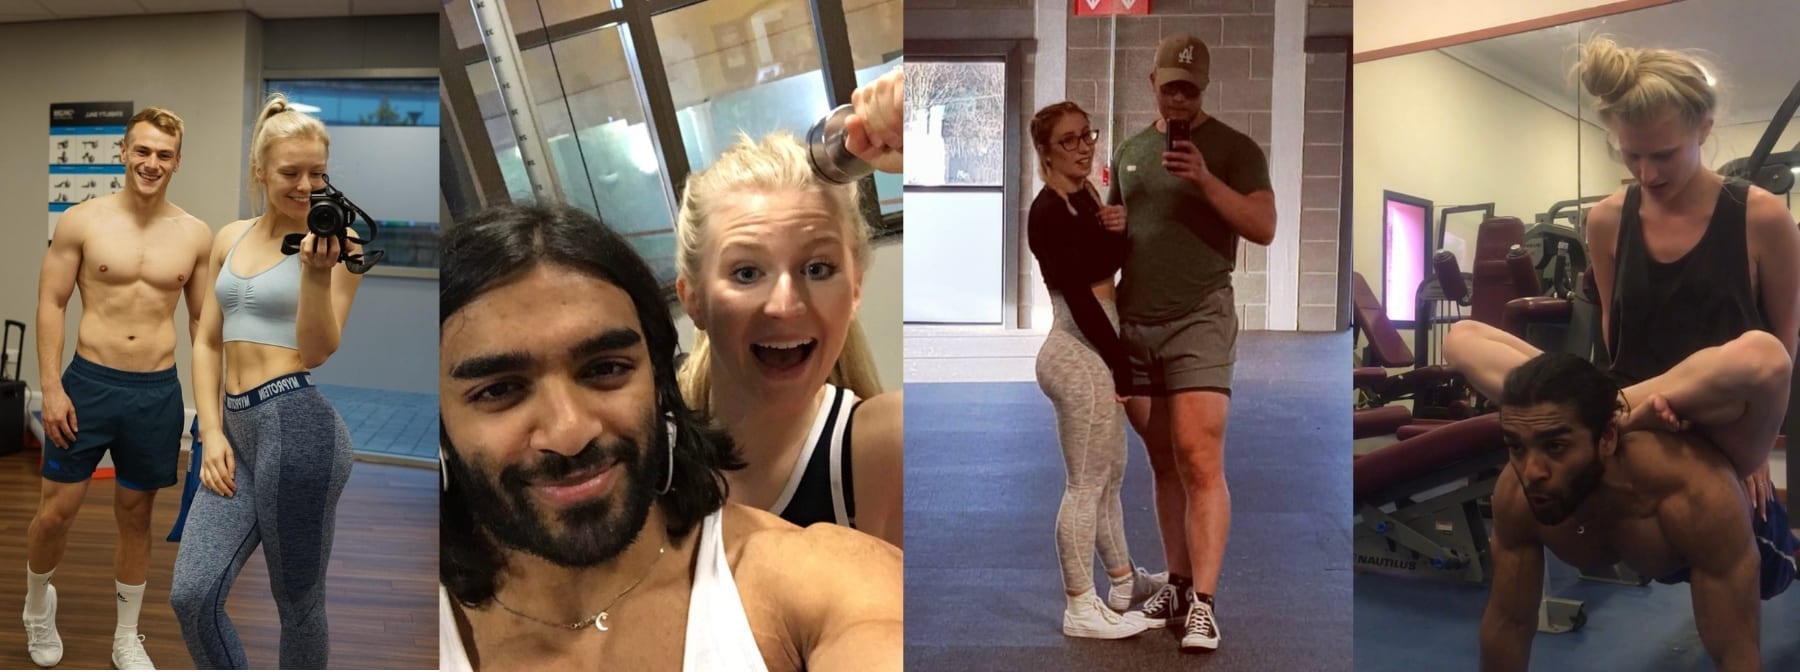 8 Gym Romance Fails That Will Make You Cringe This Valentine’s Day